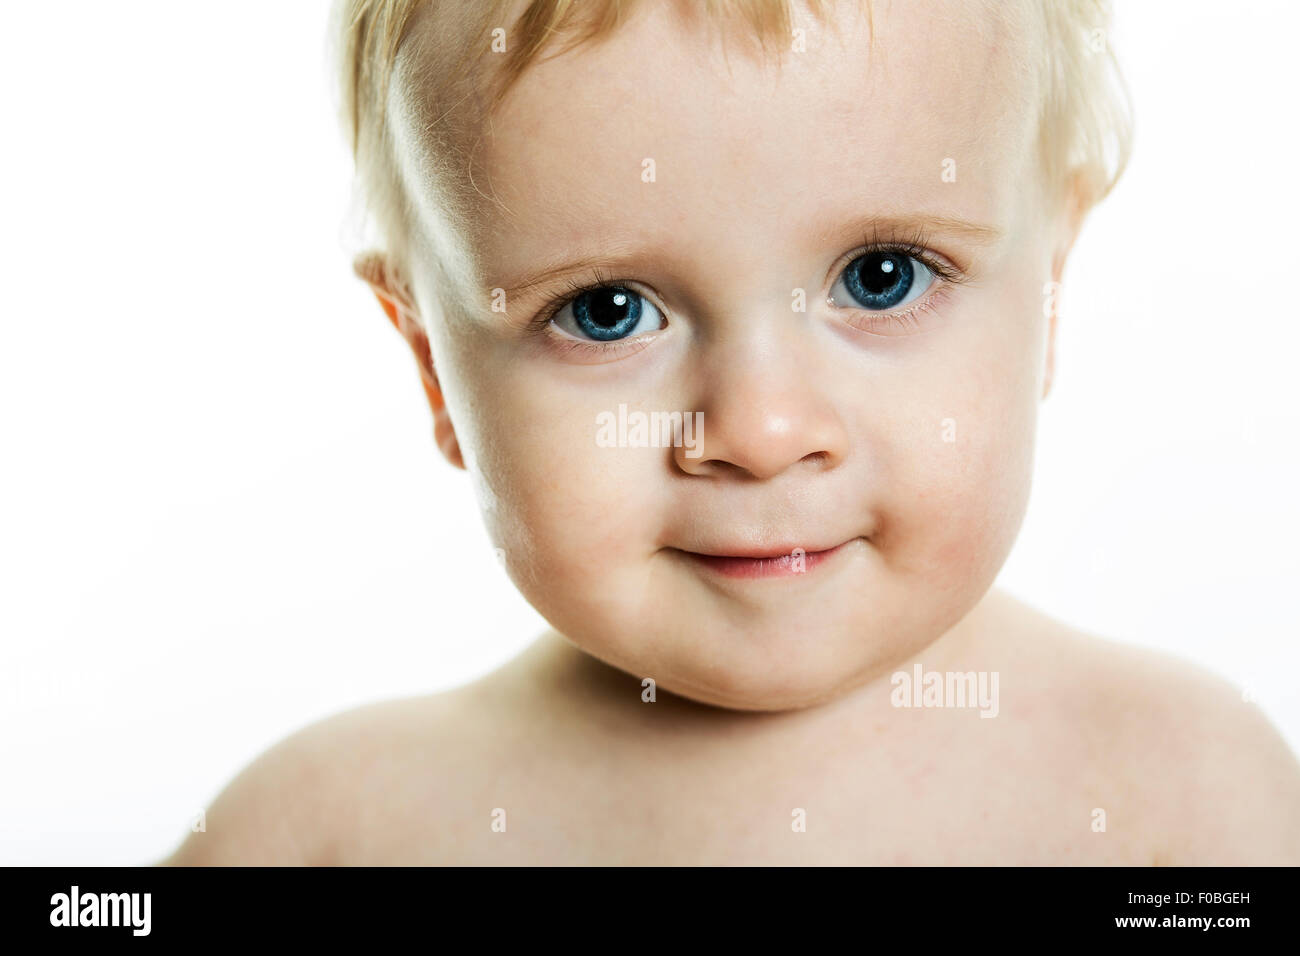 Portrait close-up of the little boy with blonde hair and blue eyes Stock Photo